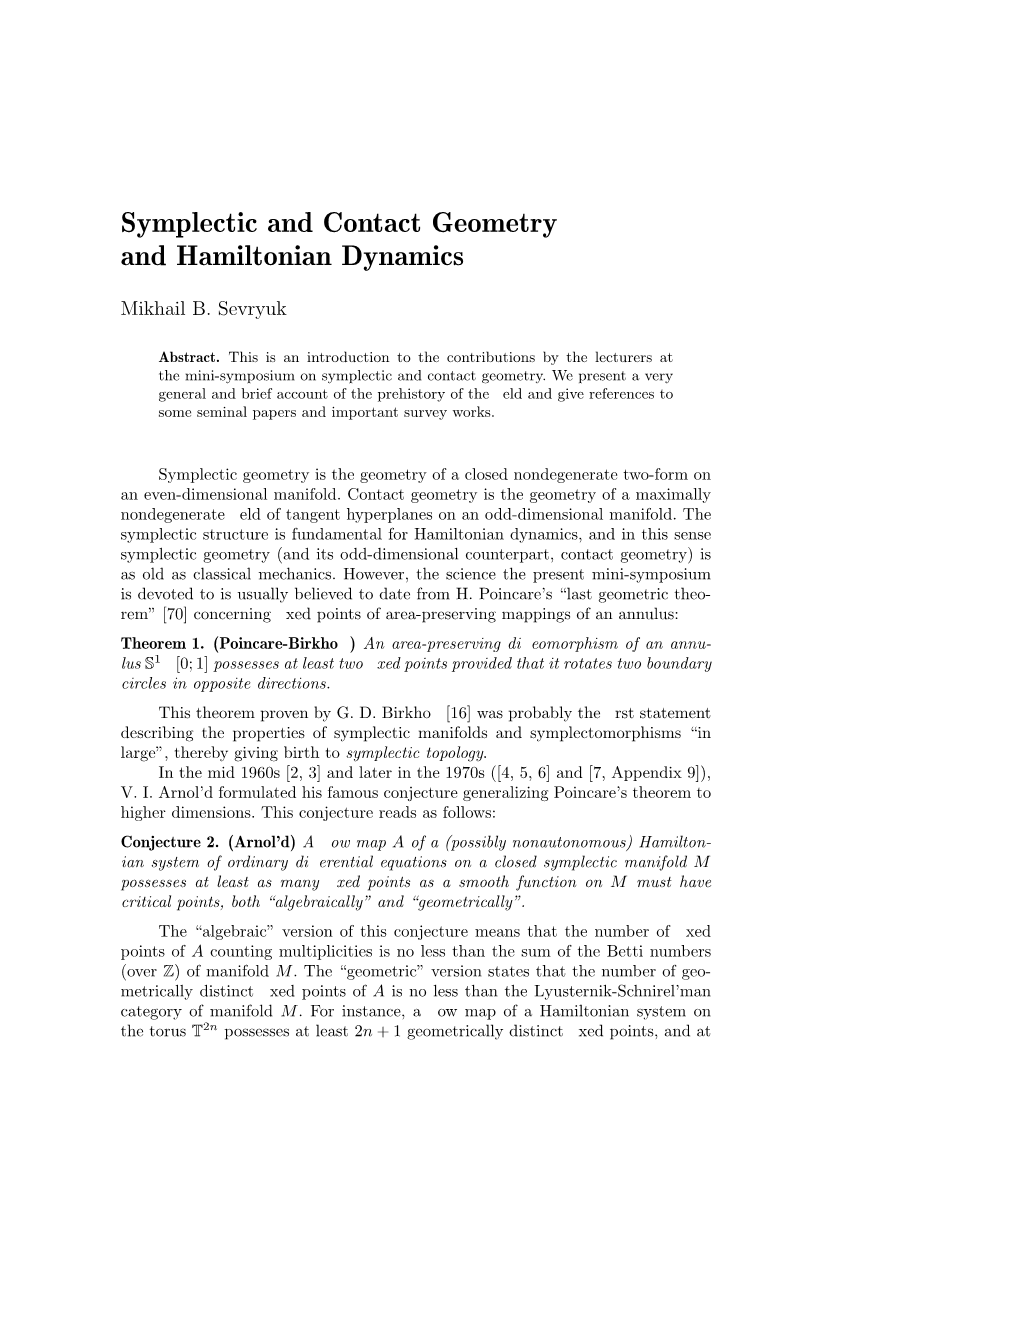 Symplectic and Contact Geometry and Hamiltonian Dynamics